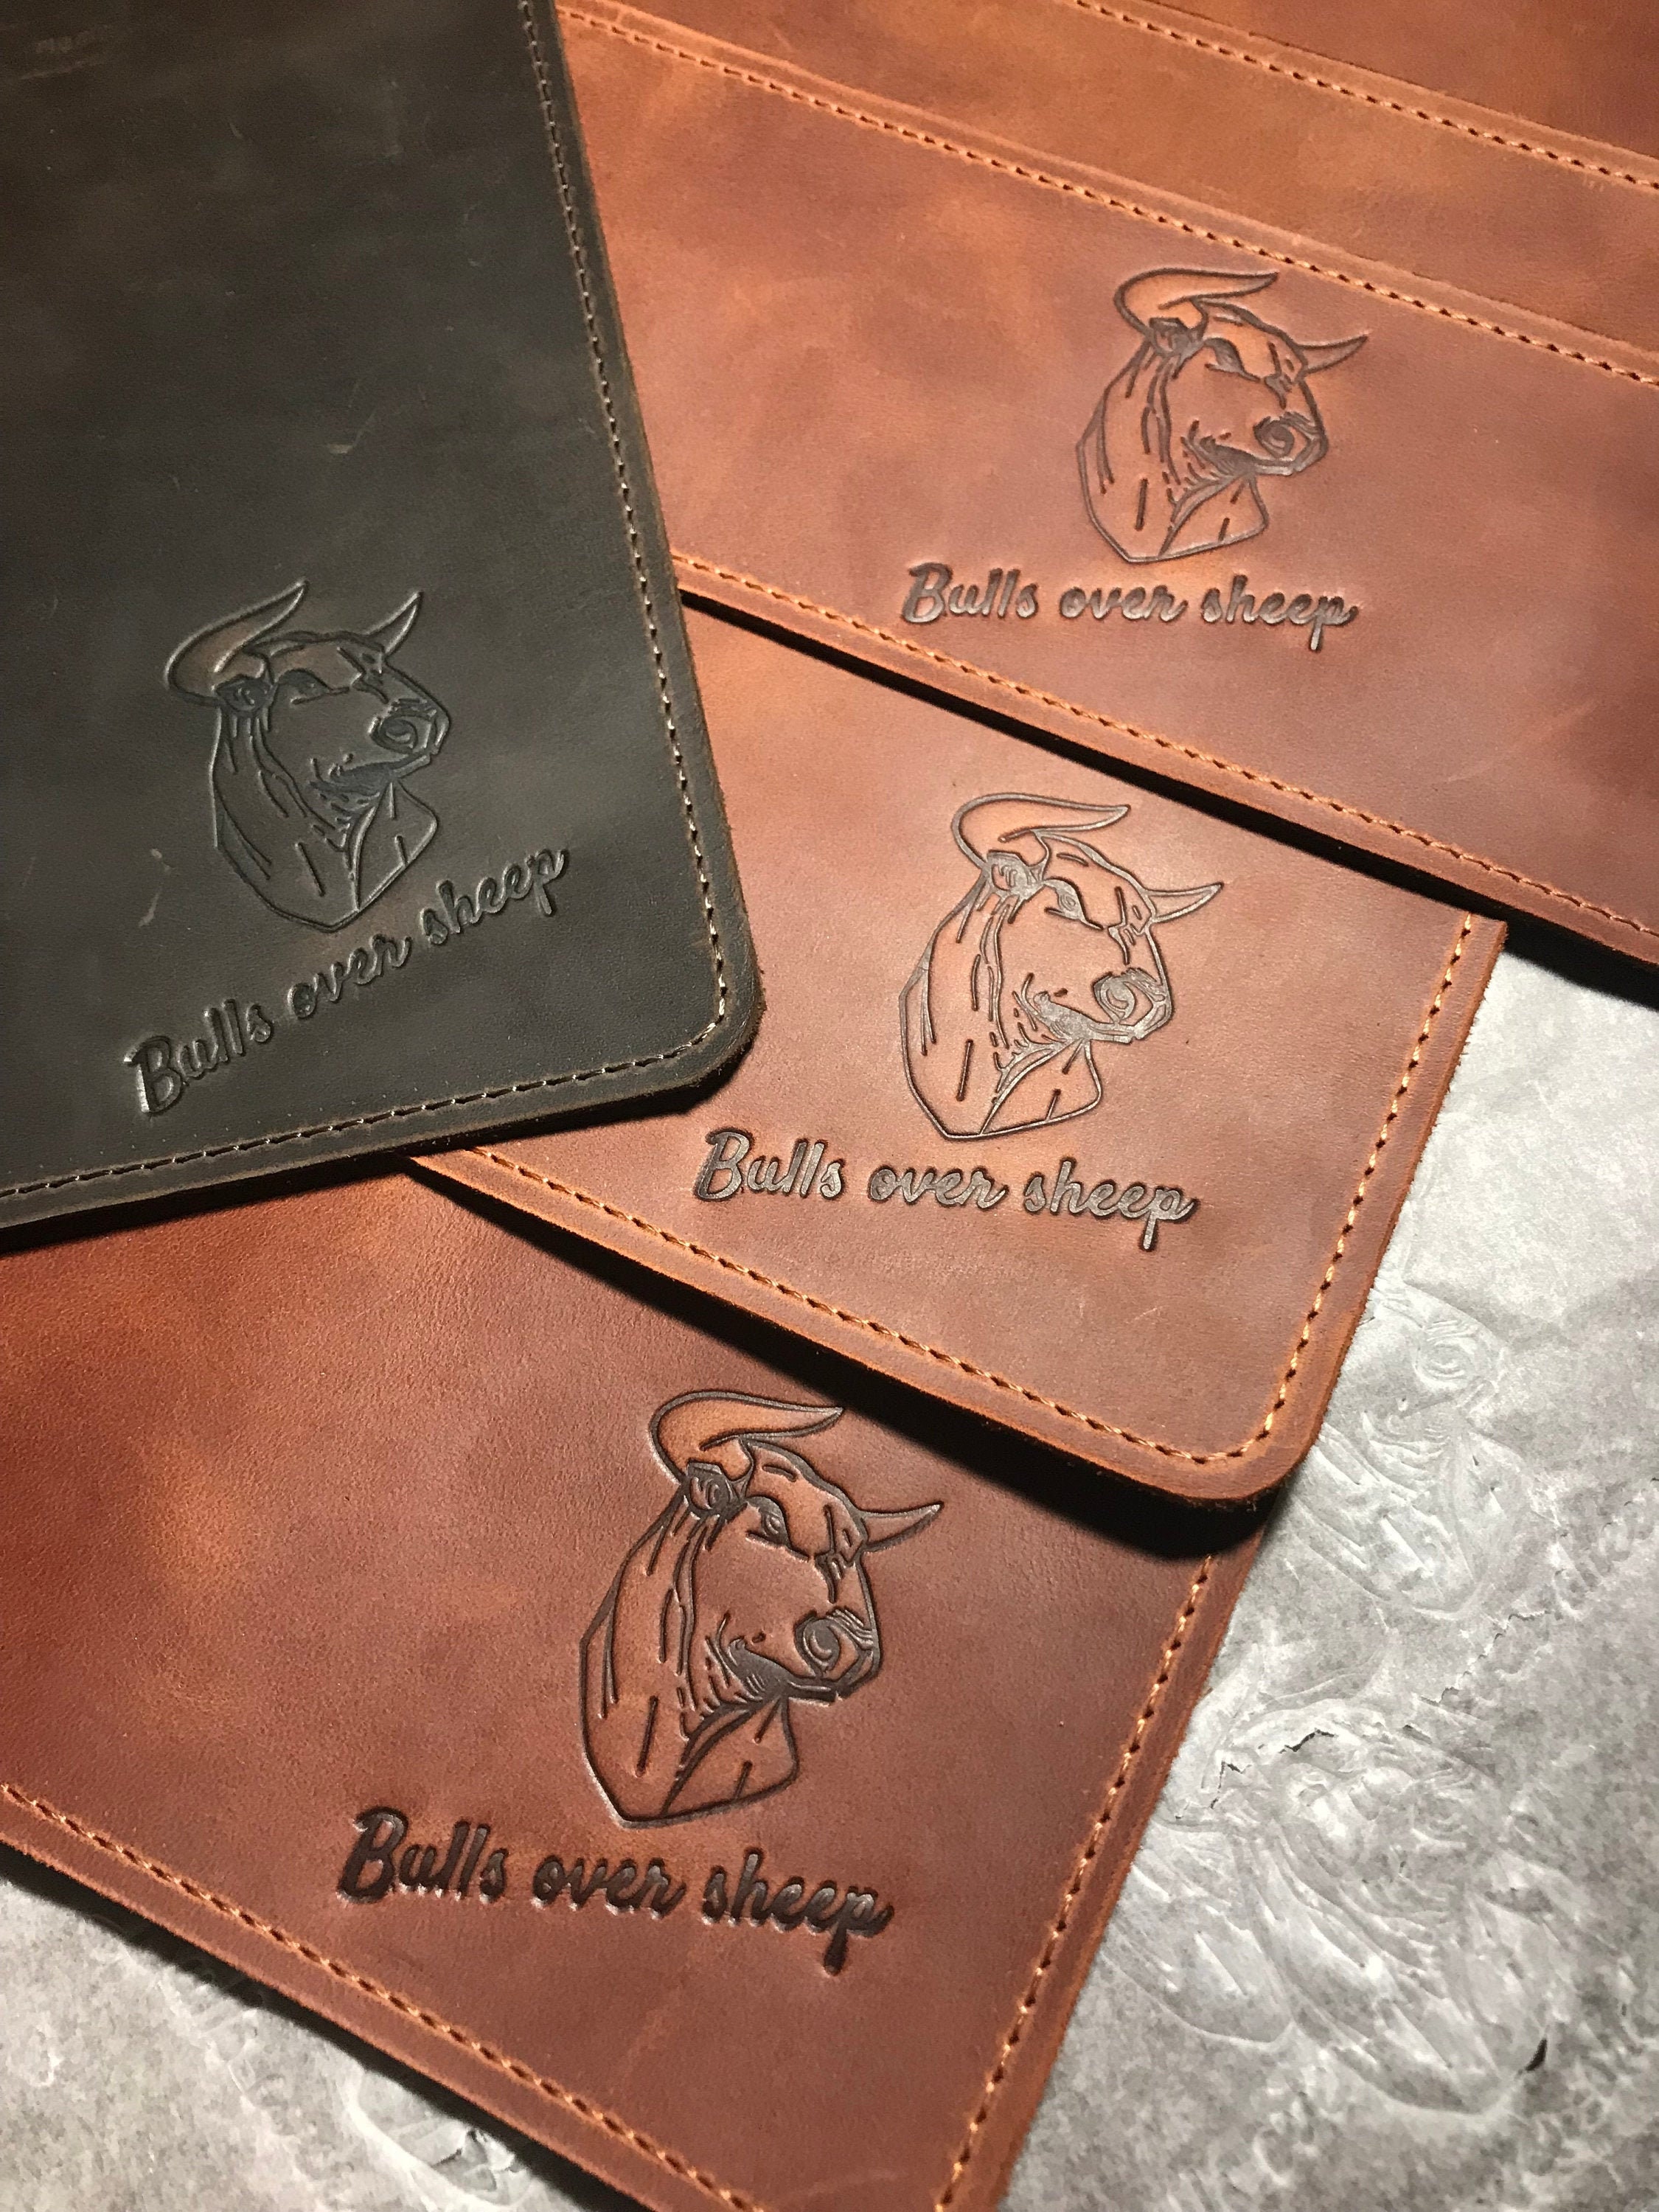 Leather Corporate Gifts - Corporate Gifts Guide